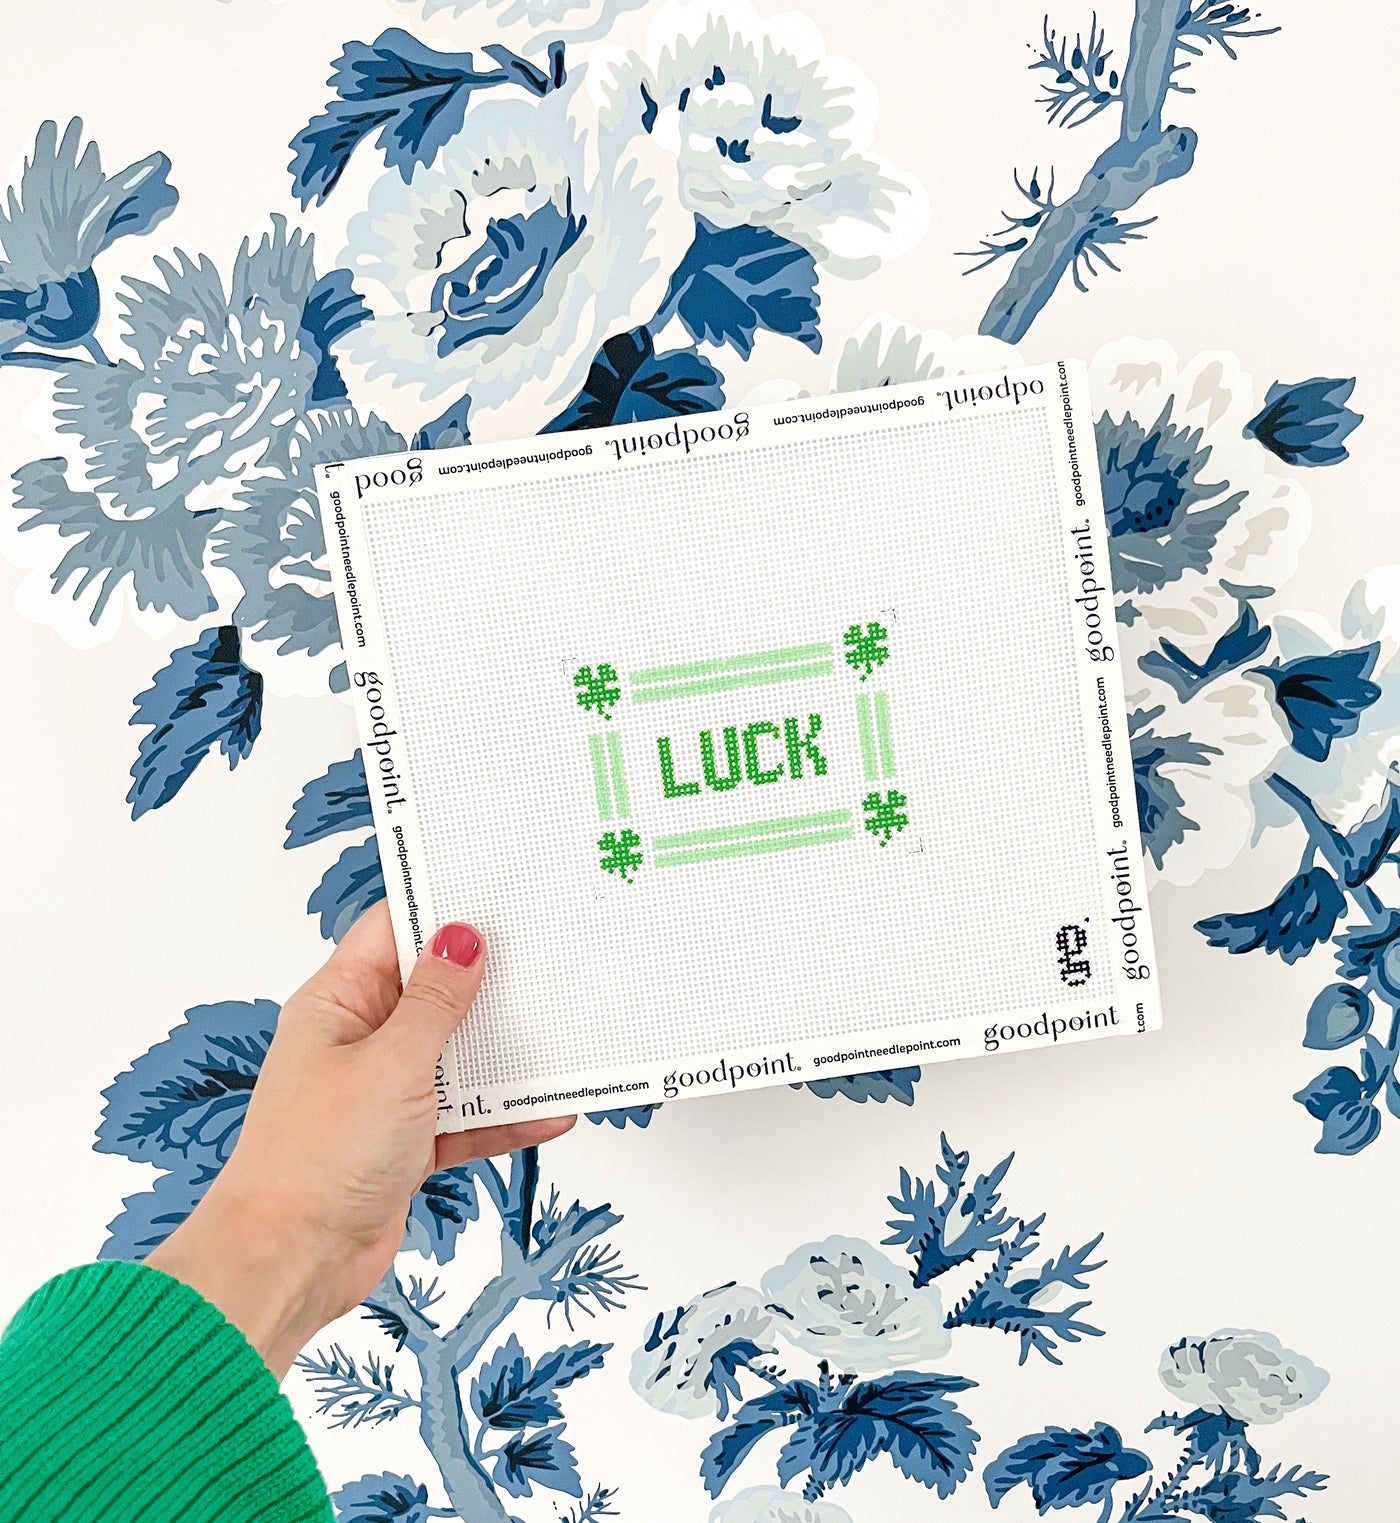 Hand holds up a white needlepoint canvas with the word LUCK in green text at center, surrounded by a mint green striped border and 4 leaf clovers at each corner